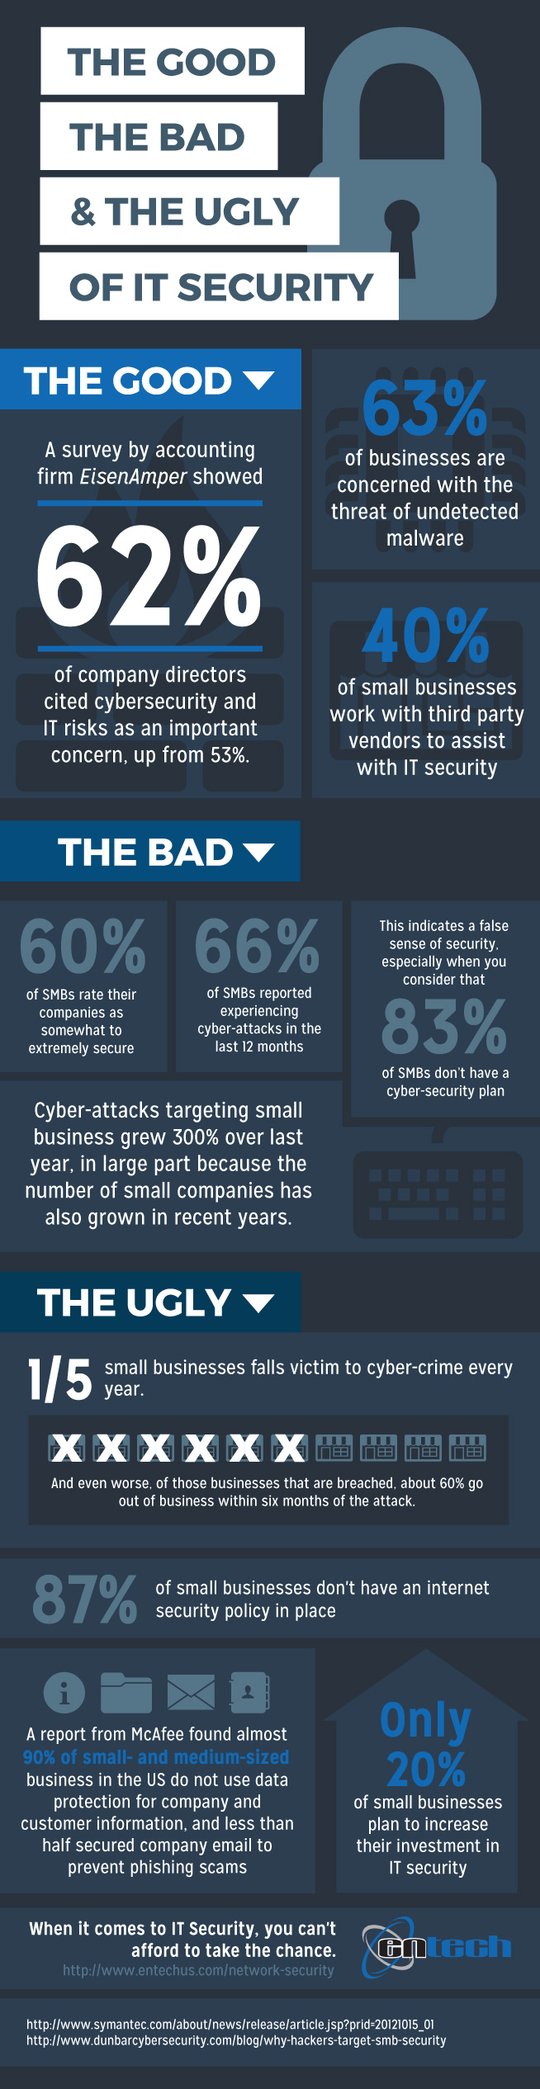 IT Security: The Good, the Bad & The Ugly {INFOGRAPHIC}